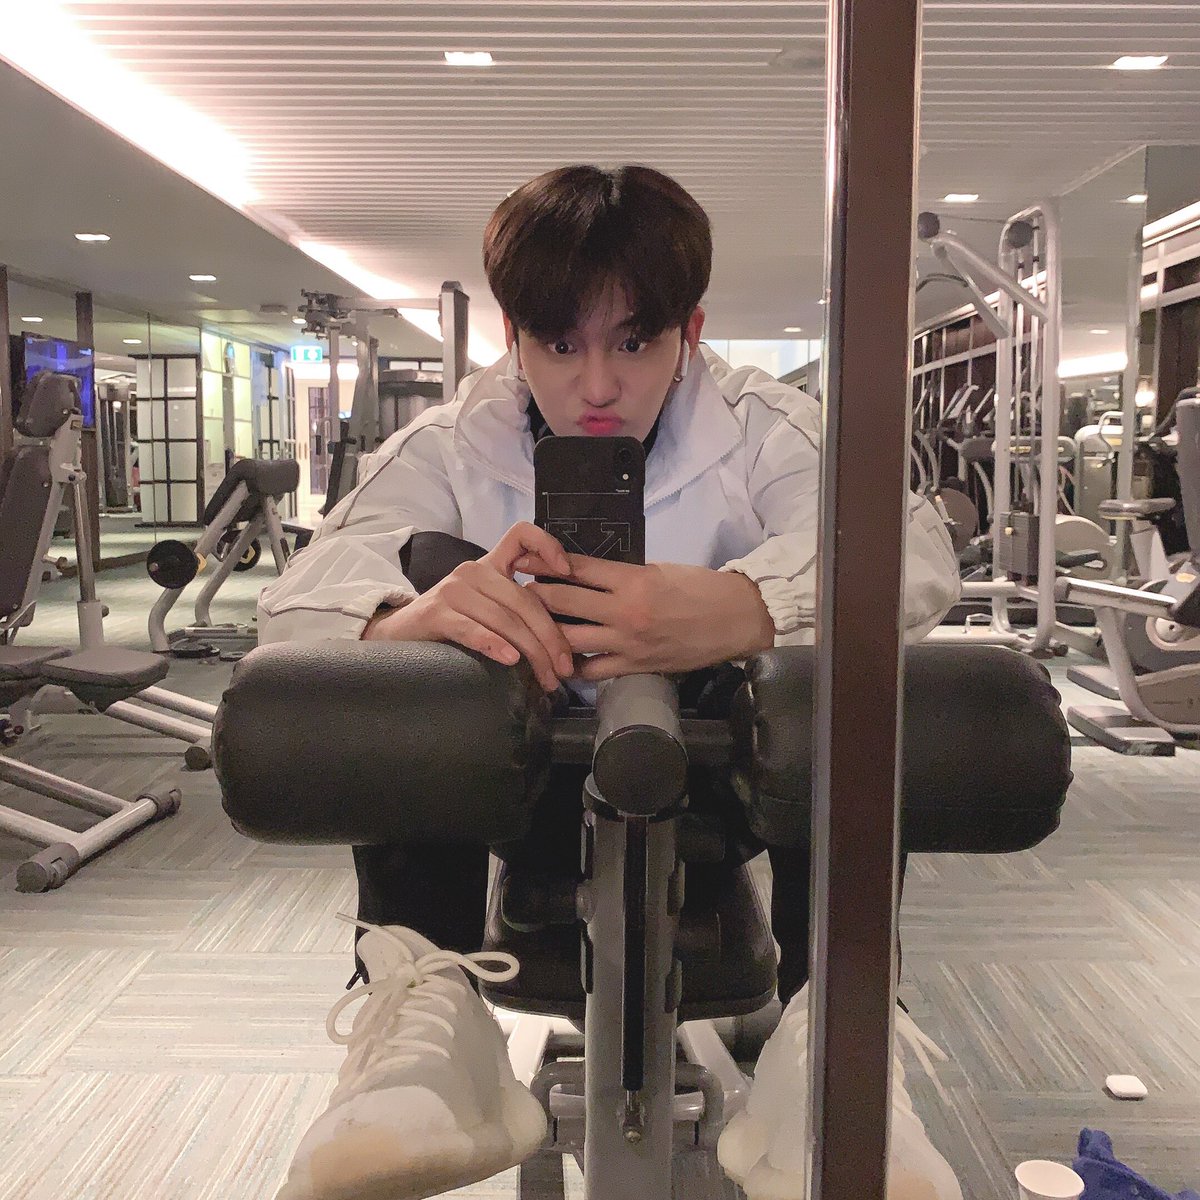 Baby at the gym